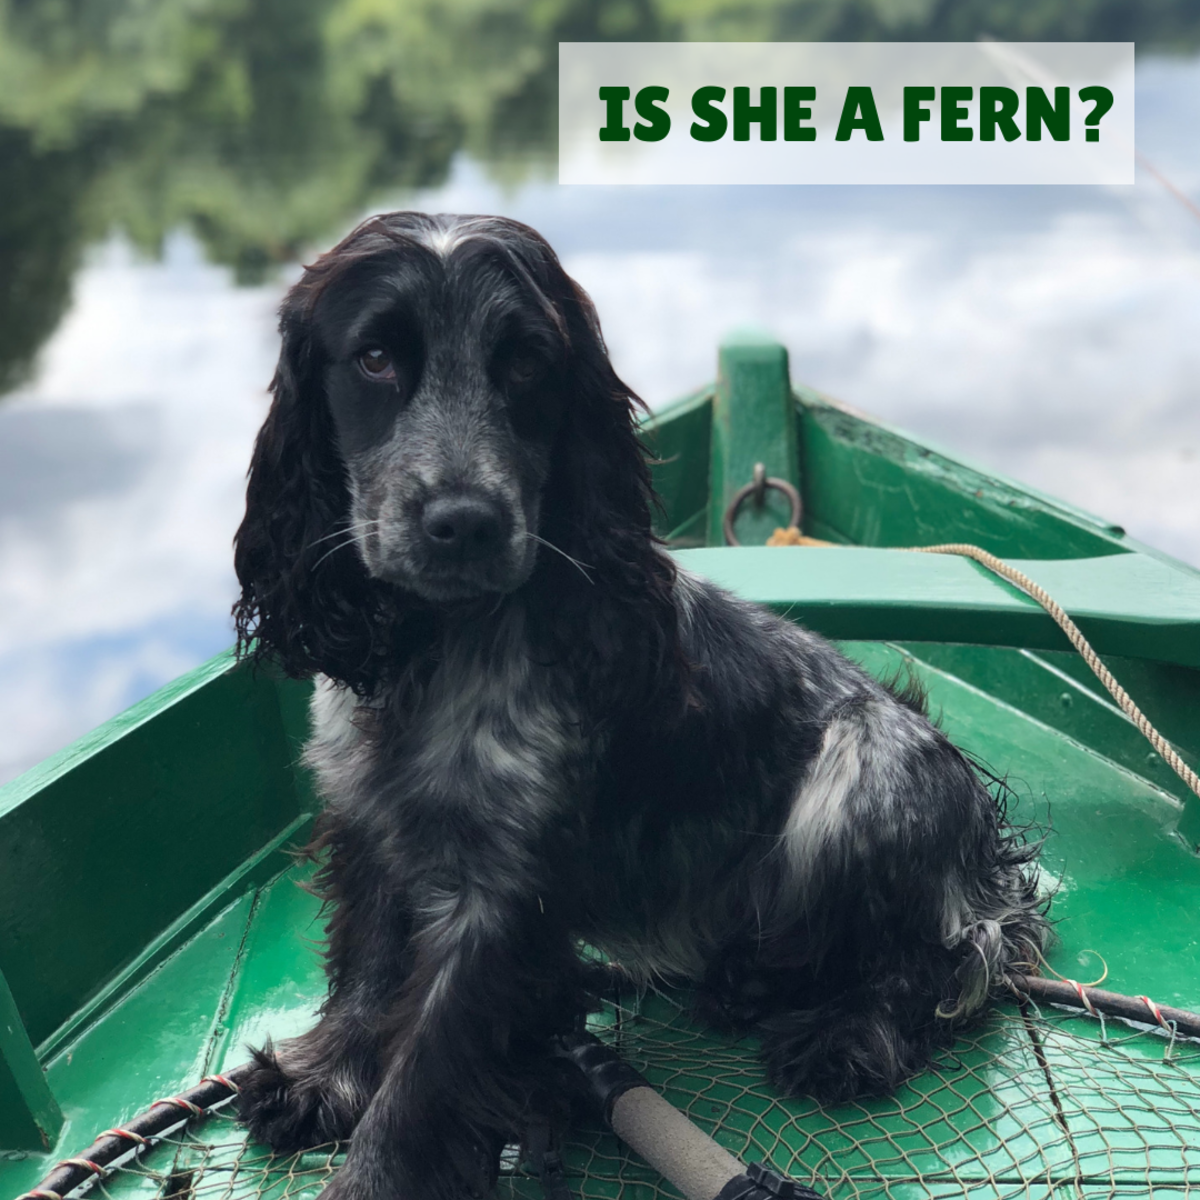 Mother Nature has abundant options to name your male or female
dog.